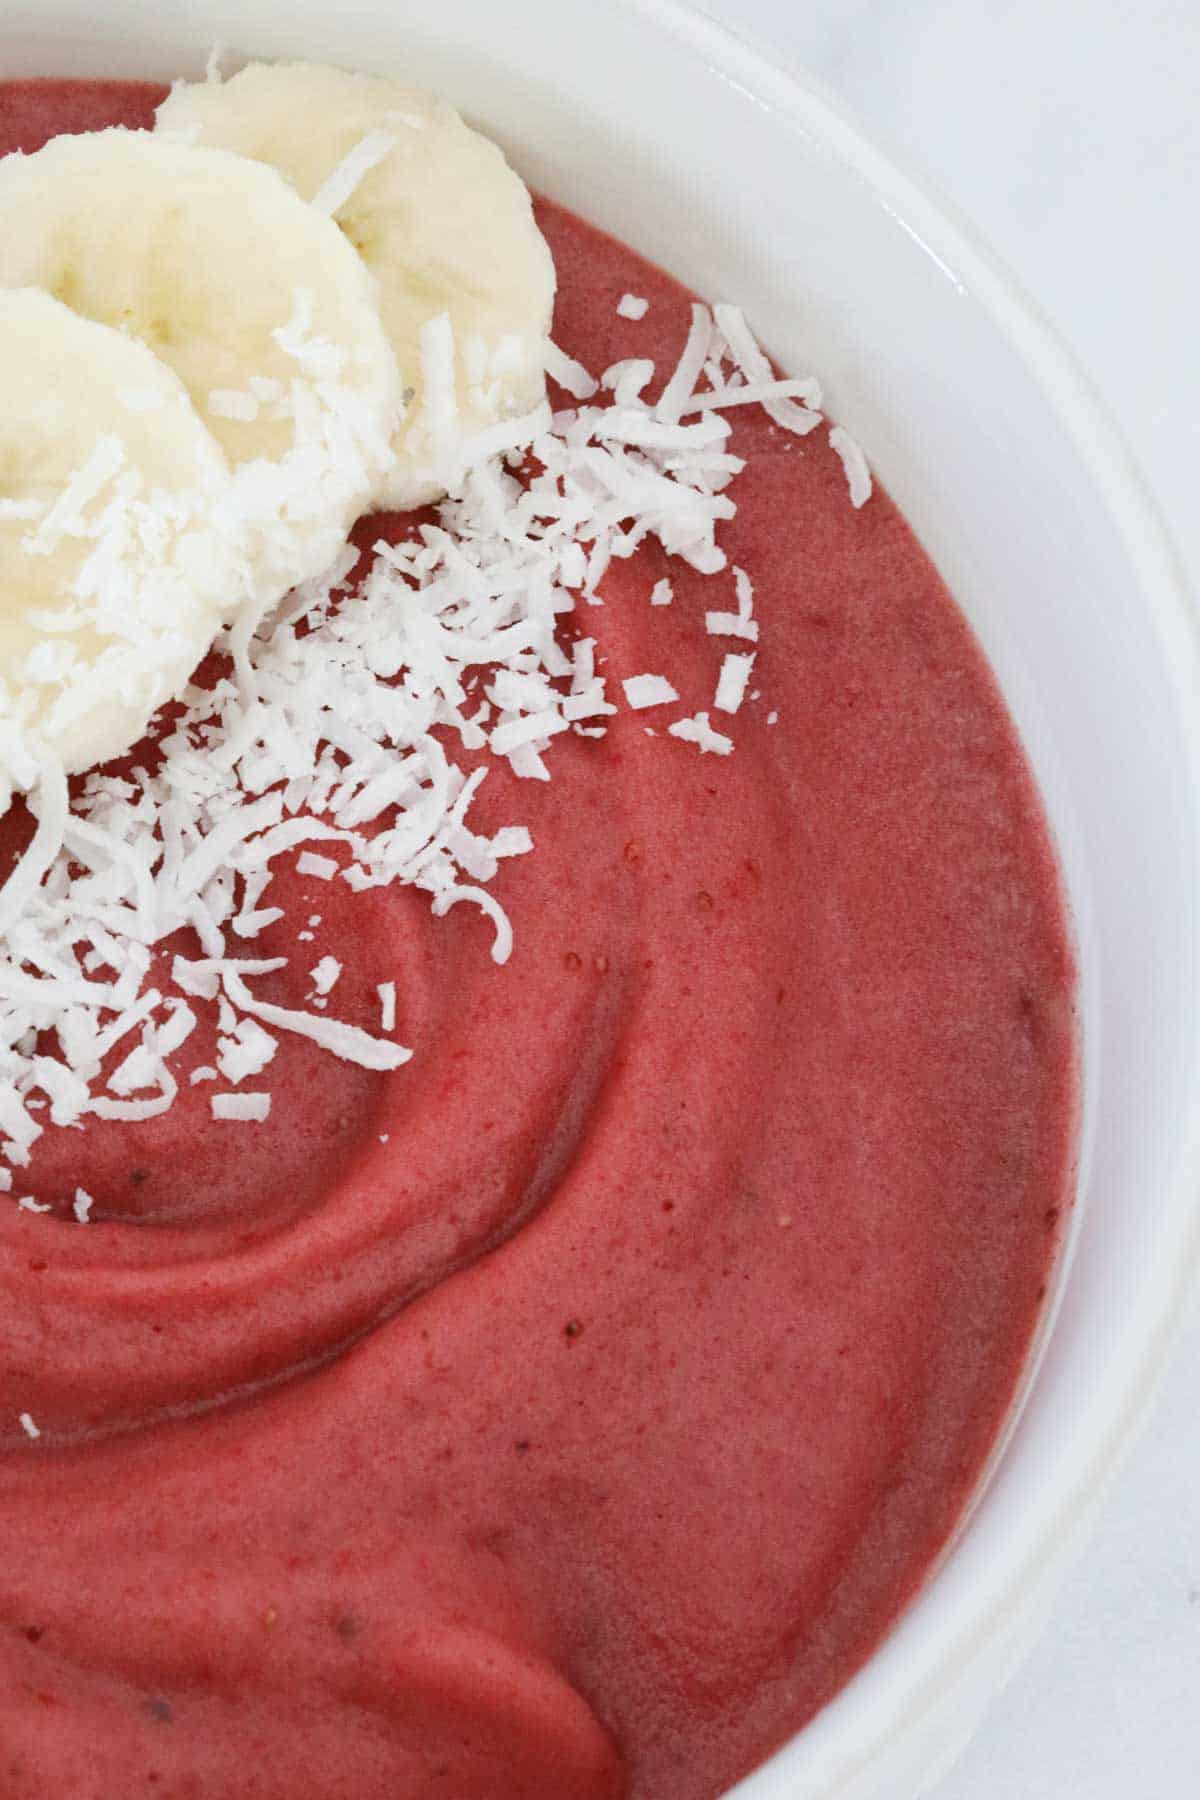 Coconut and banana on a berry smoothie bowl.